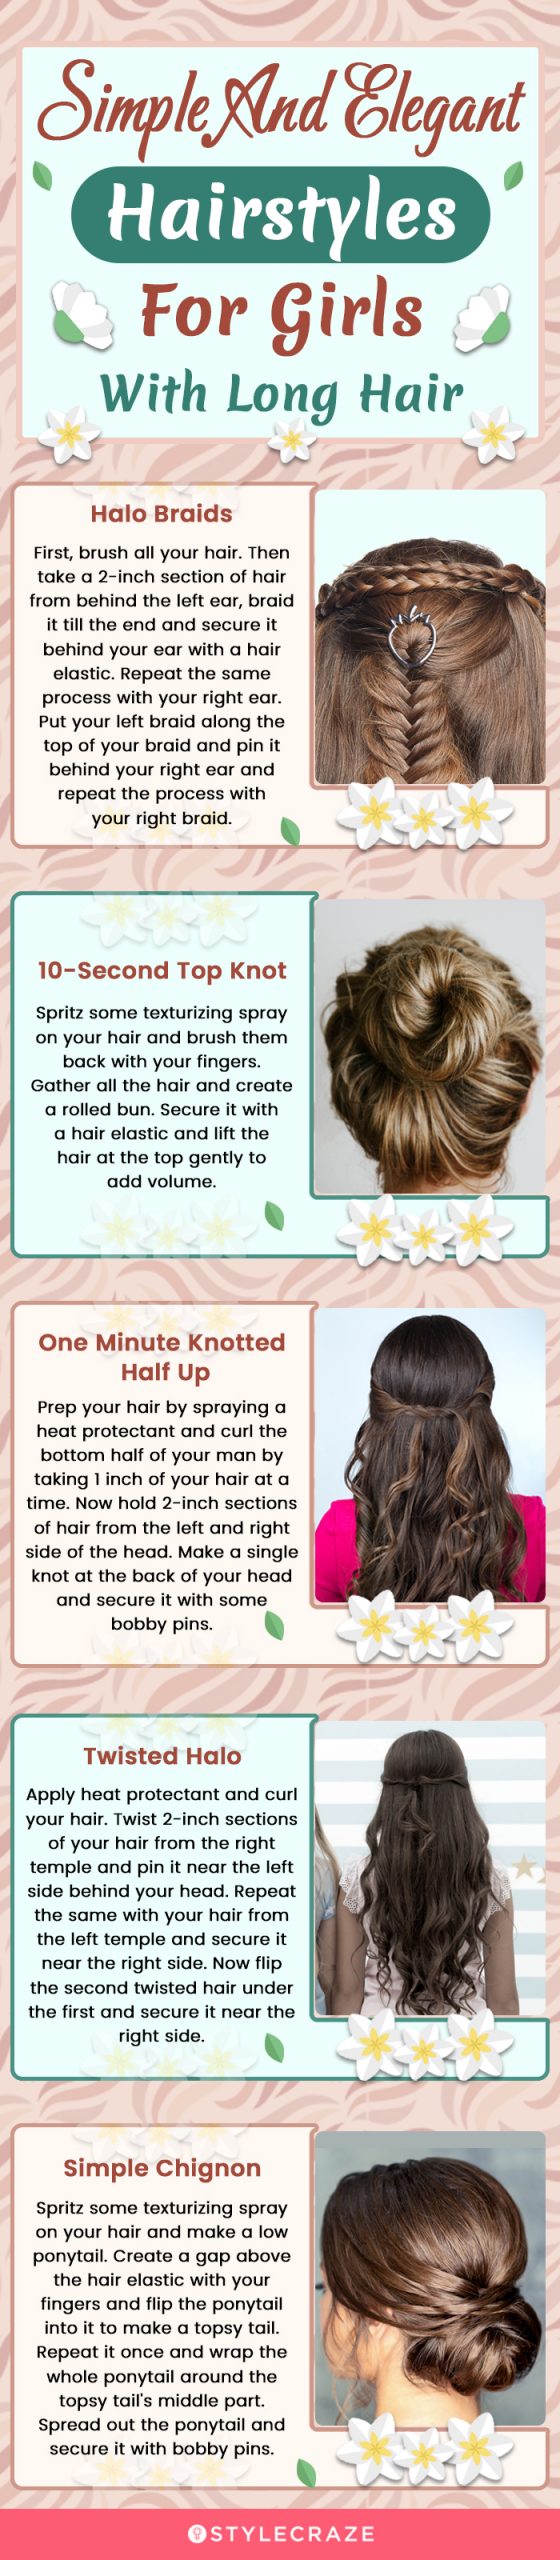 simple and elegant hairstyles for girls with long hair (infographic)